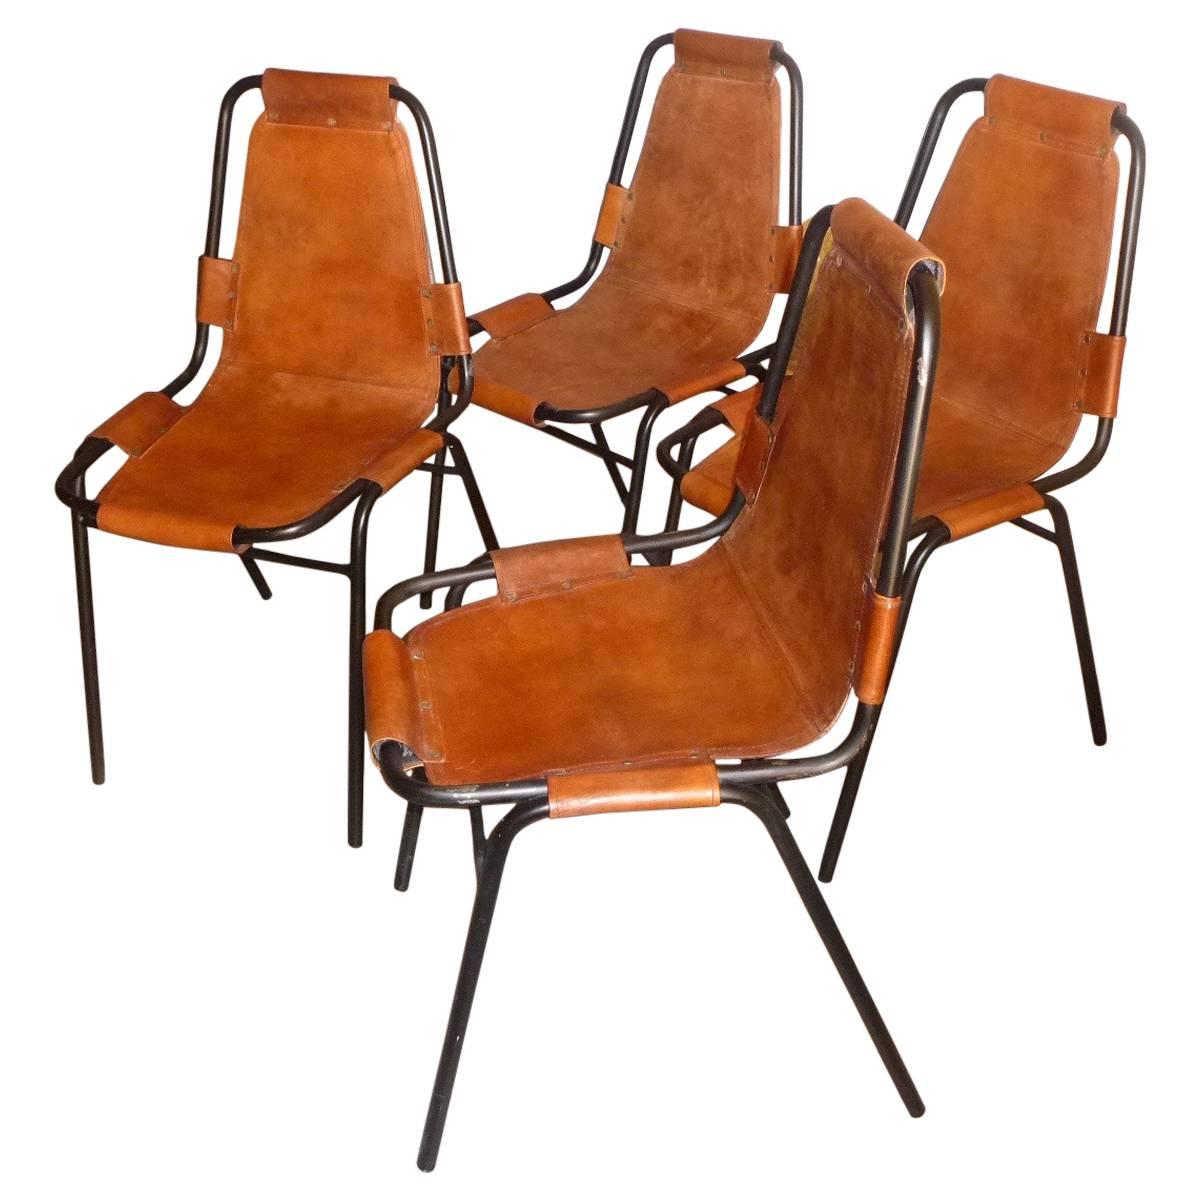 Charlotte Perriand, Four "Les Arcs" Cognac Leather Chairs, 1960s